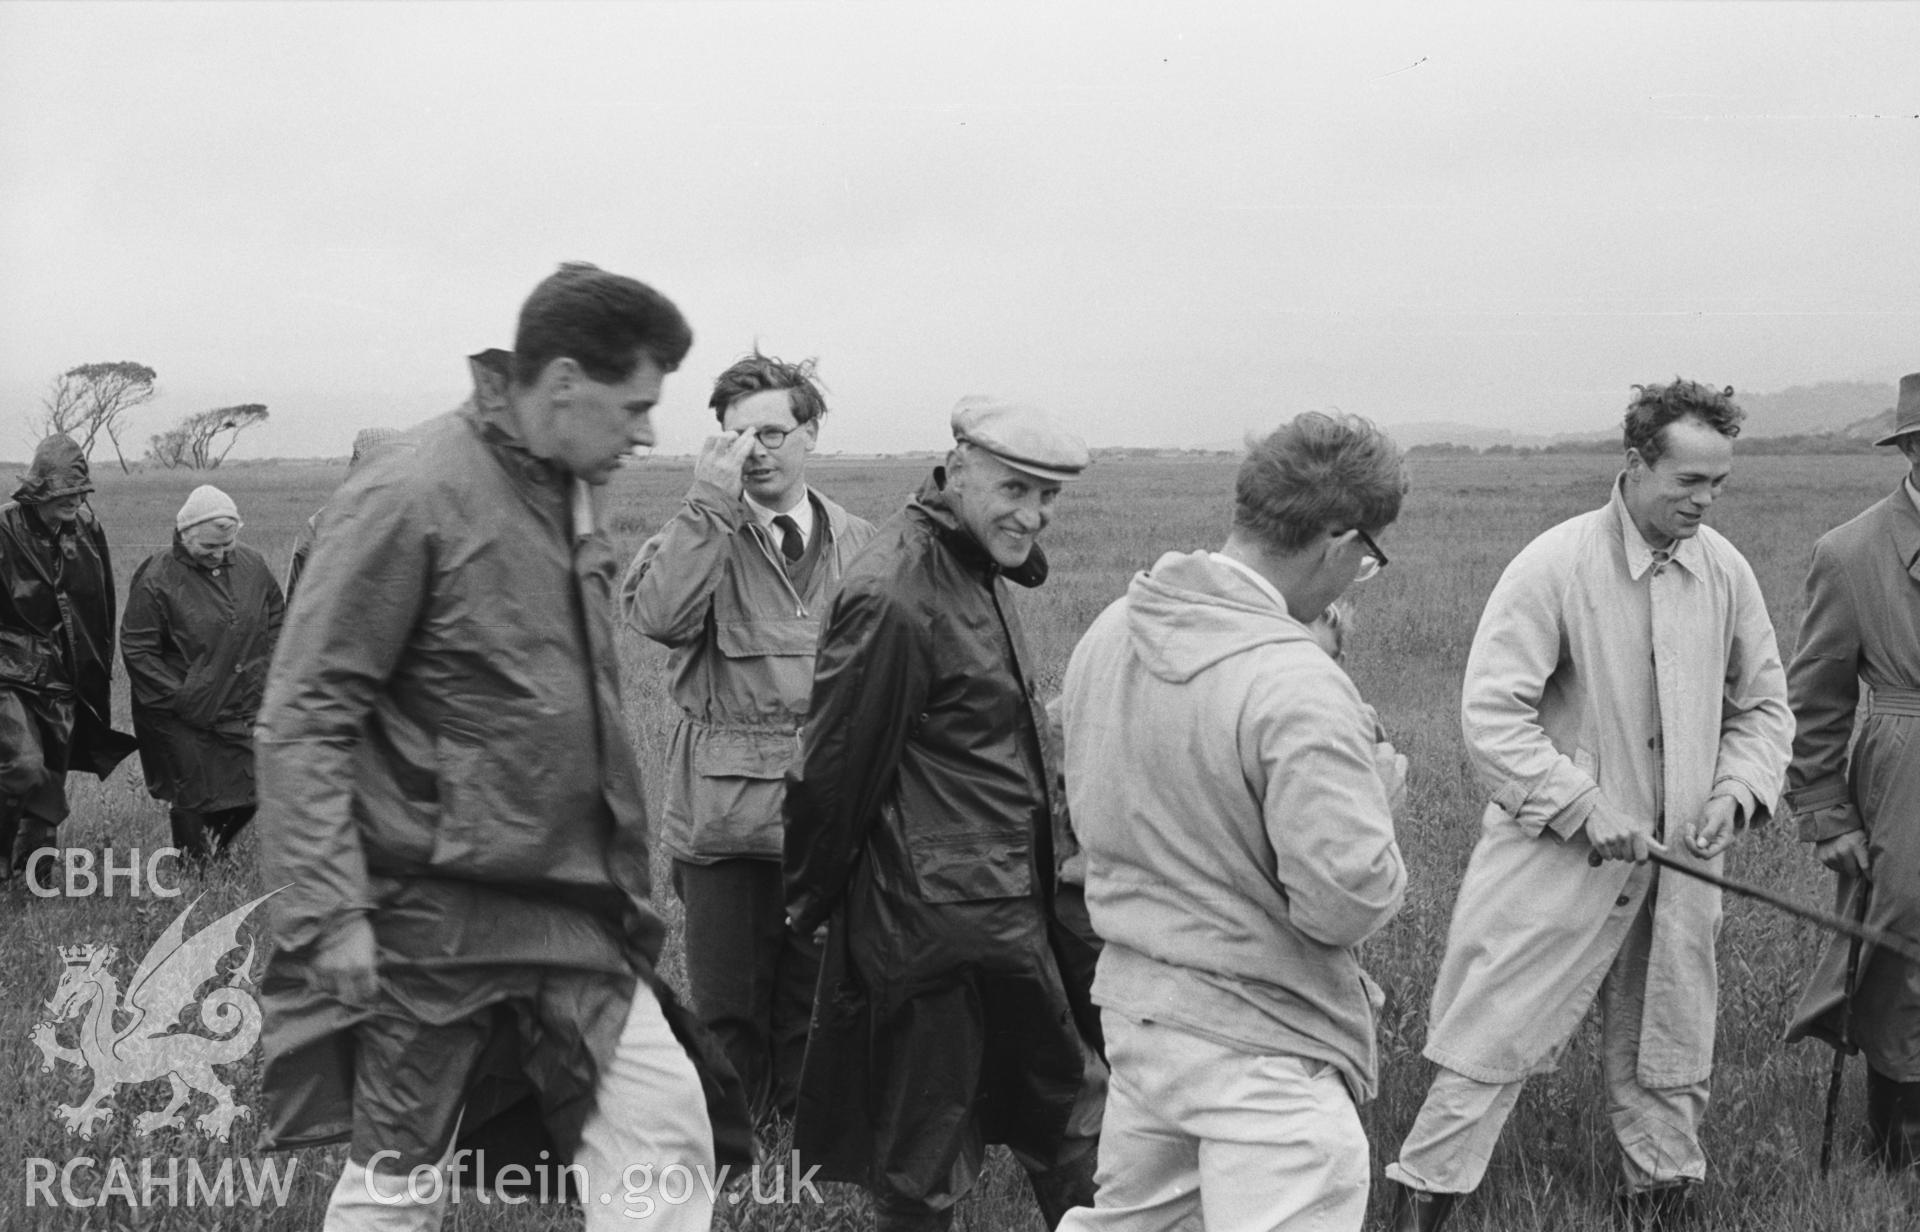 Digital copy of a black and white negative showing BSBI Welsh Regional excursion to Borth Bog. Photographed in September 1963 by Arthur O. Chater from Grid Reference c. 637 917.